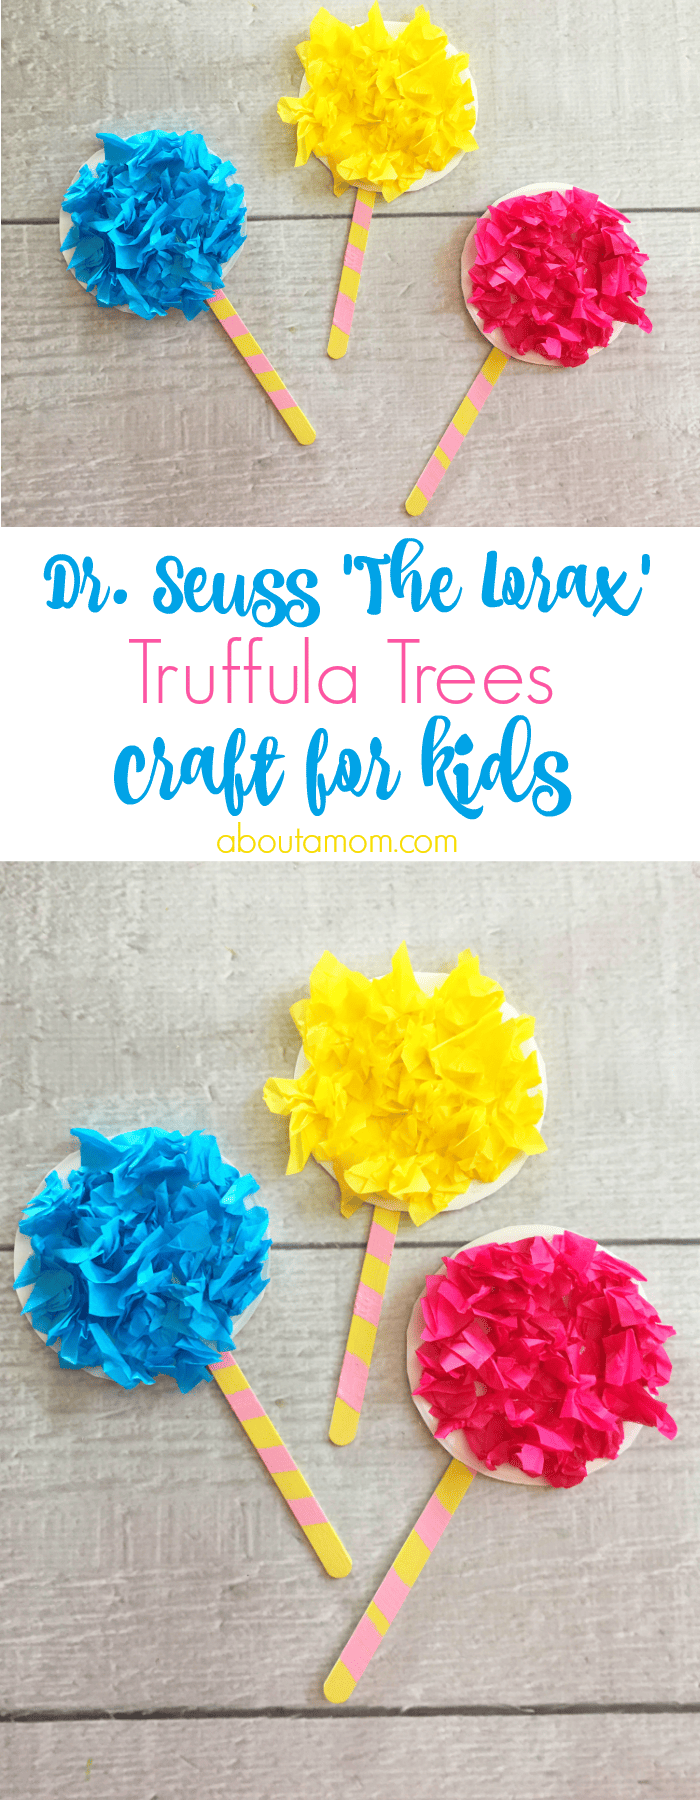 This-fun-truffula-trees-craft-is-a-fun-activity-to-do-with-the-kids-after-reading-The-Lorax-by-Dr.-Seuss..png